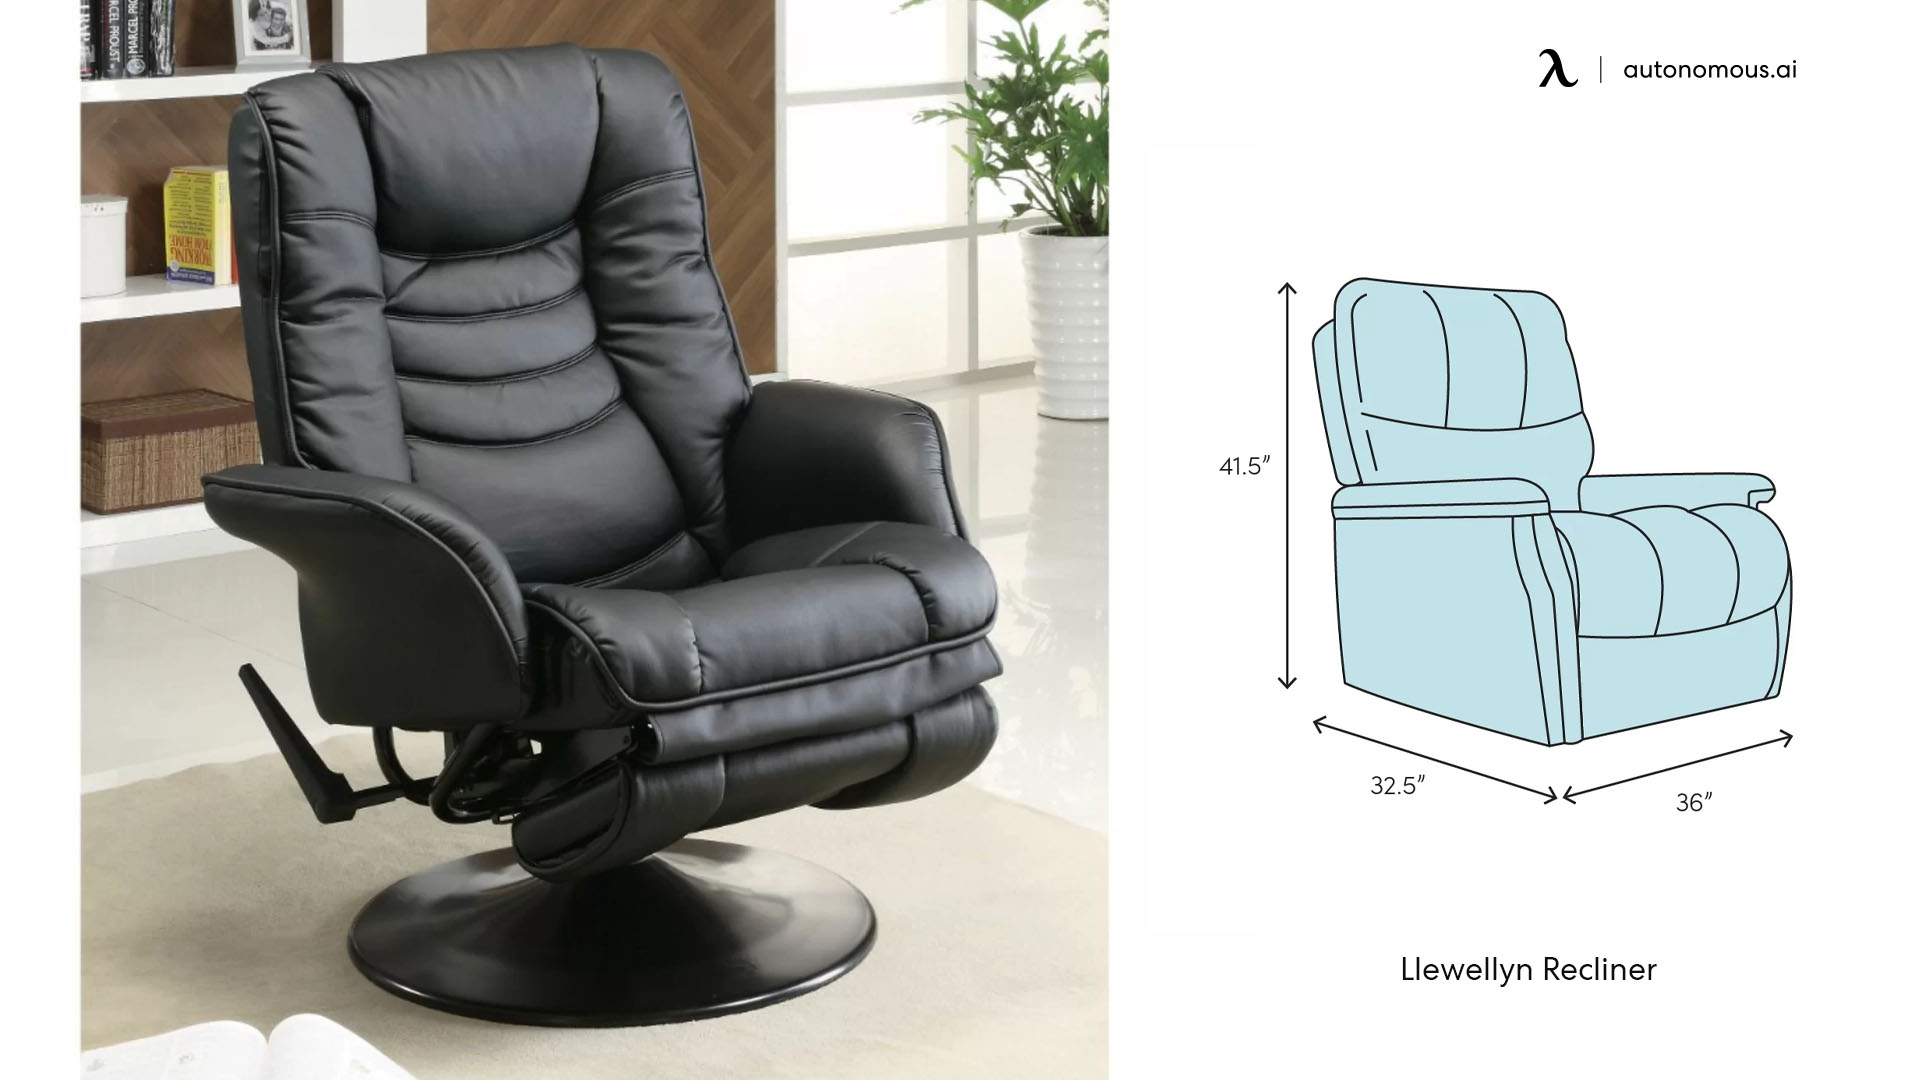 The Llewellyn Recliner from Latitude Run